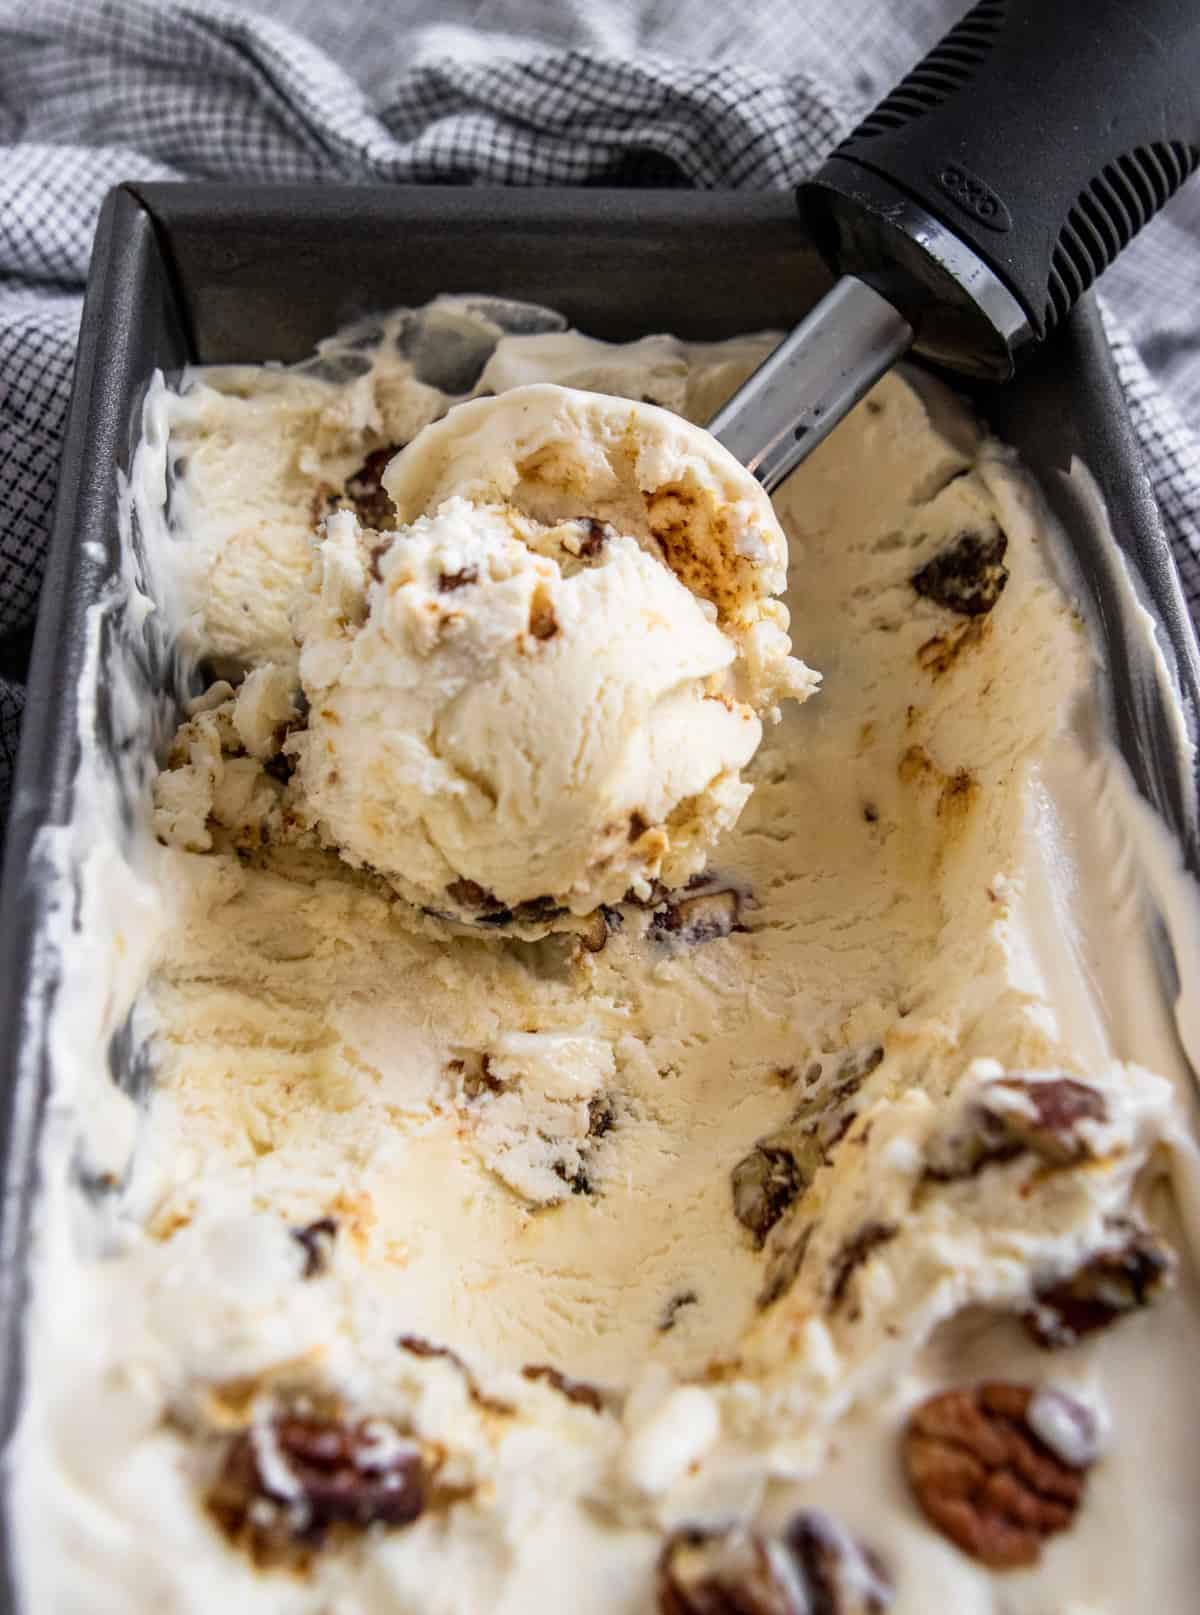 Butter pecan ice cream scooped in container.